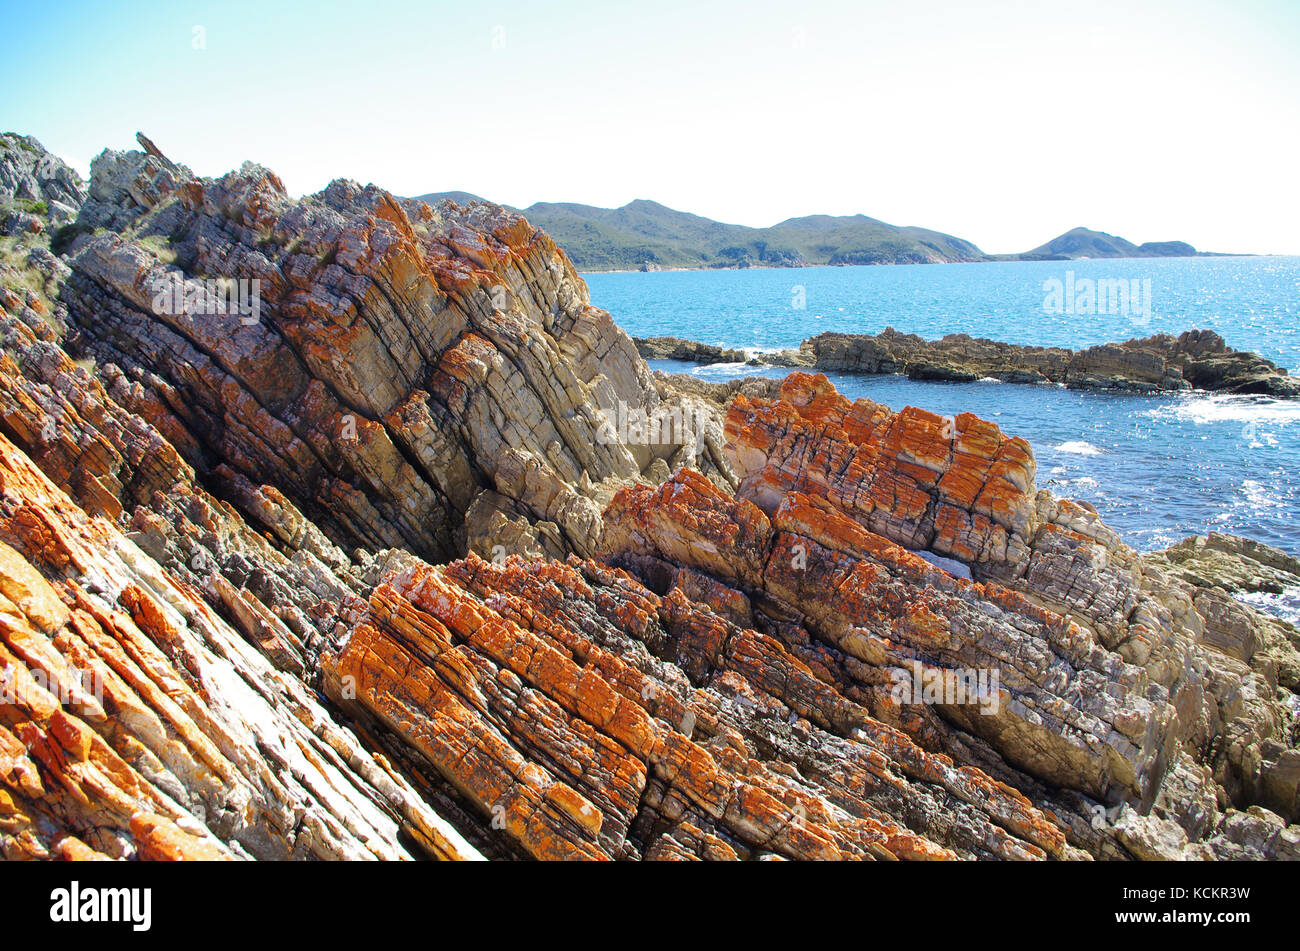 Coastline of tortured quartzite Pre-cambrian rocks that have undergone intensive folding over their long and ancient history. Rocky Cape, northwest Ta Stock Photo